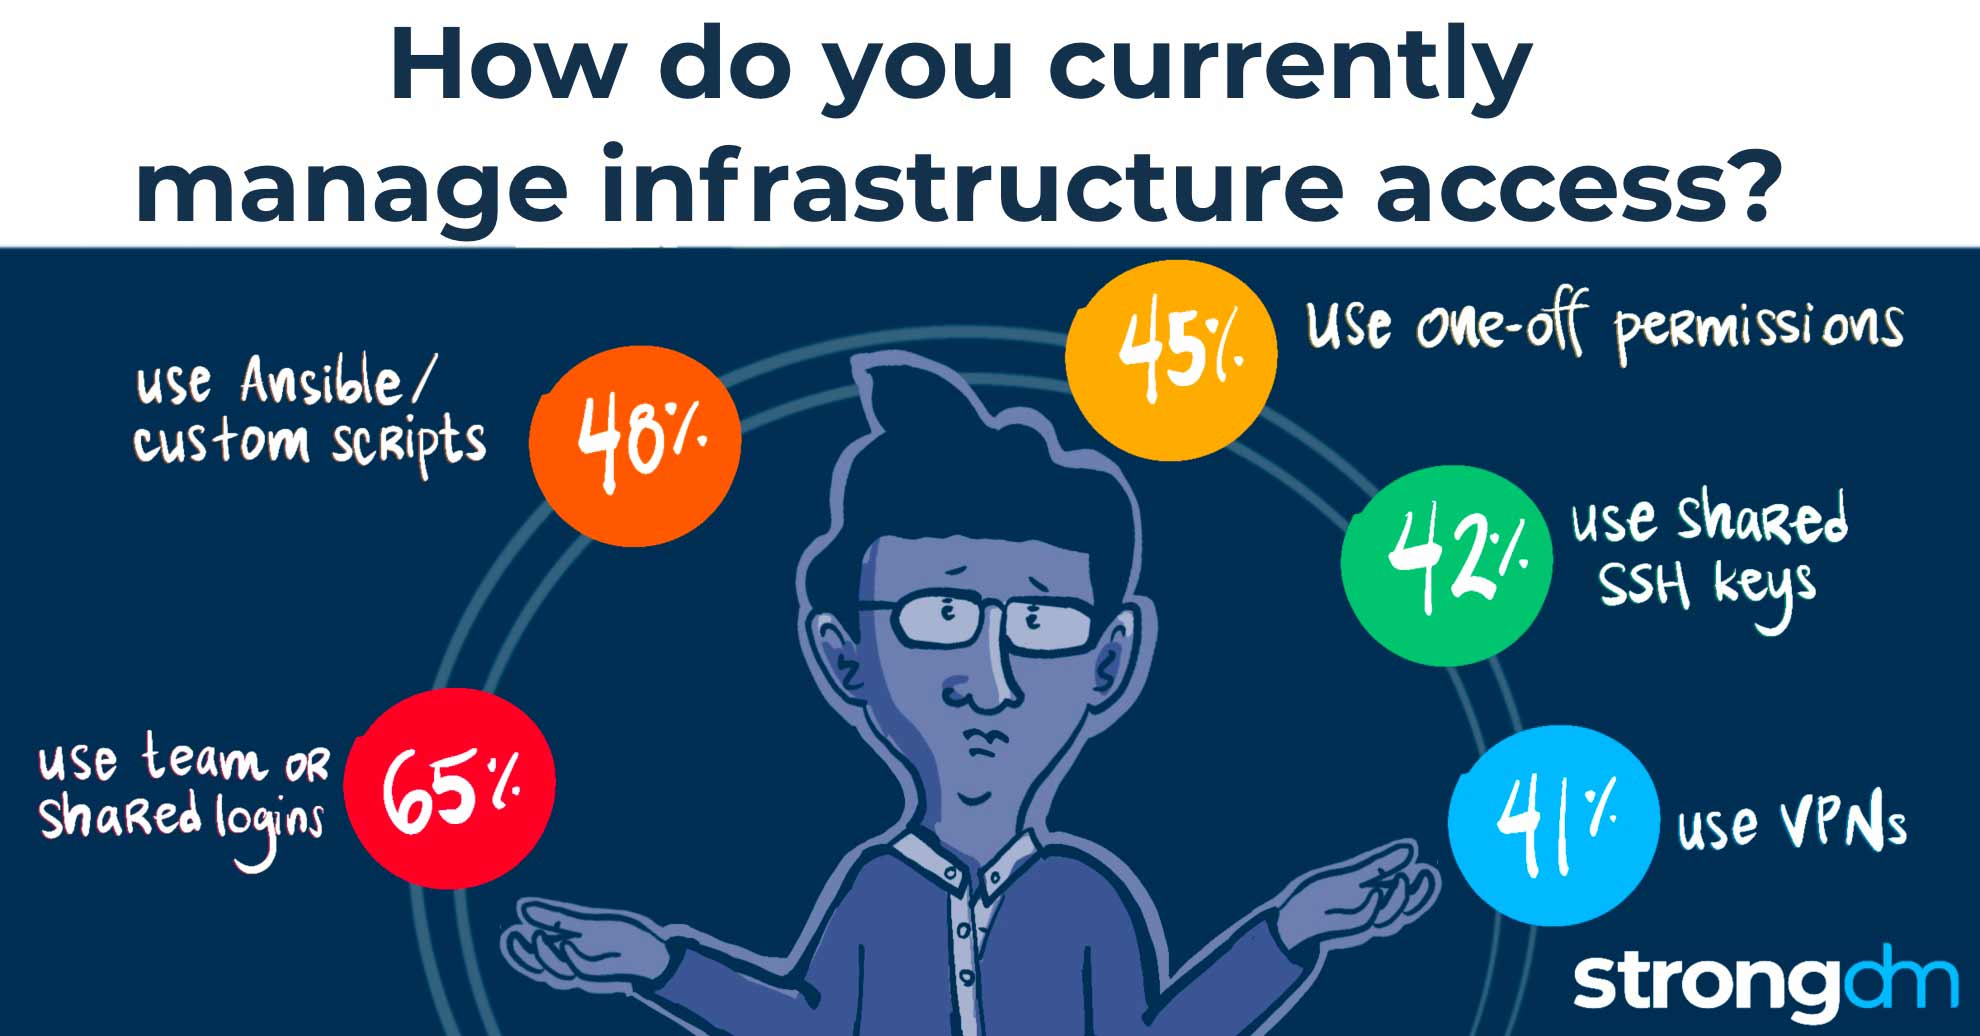 How do you currently manage infrastructure access?